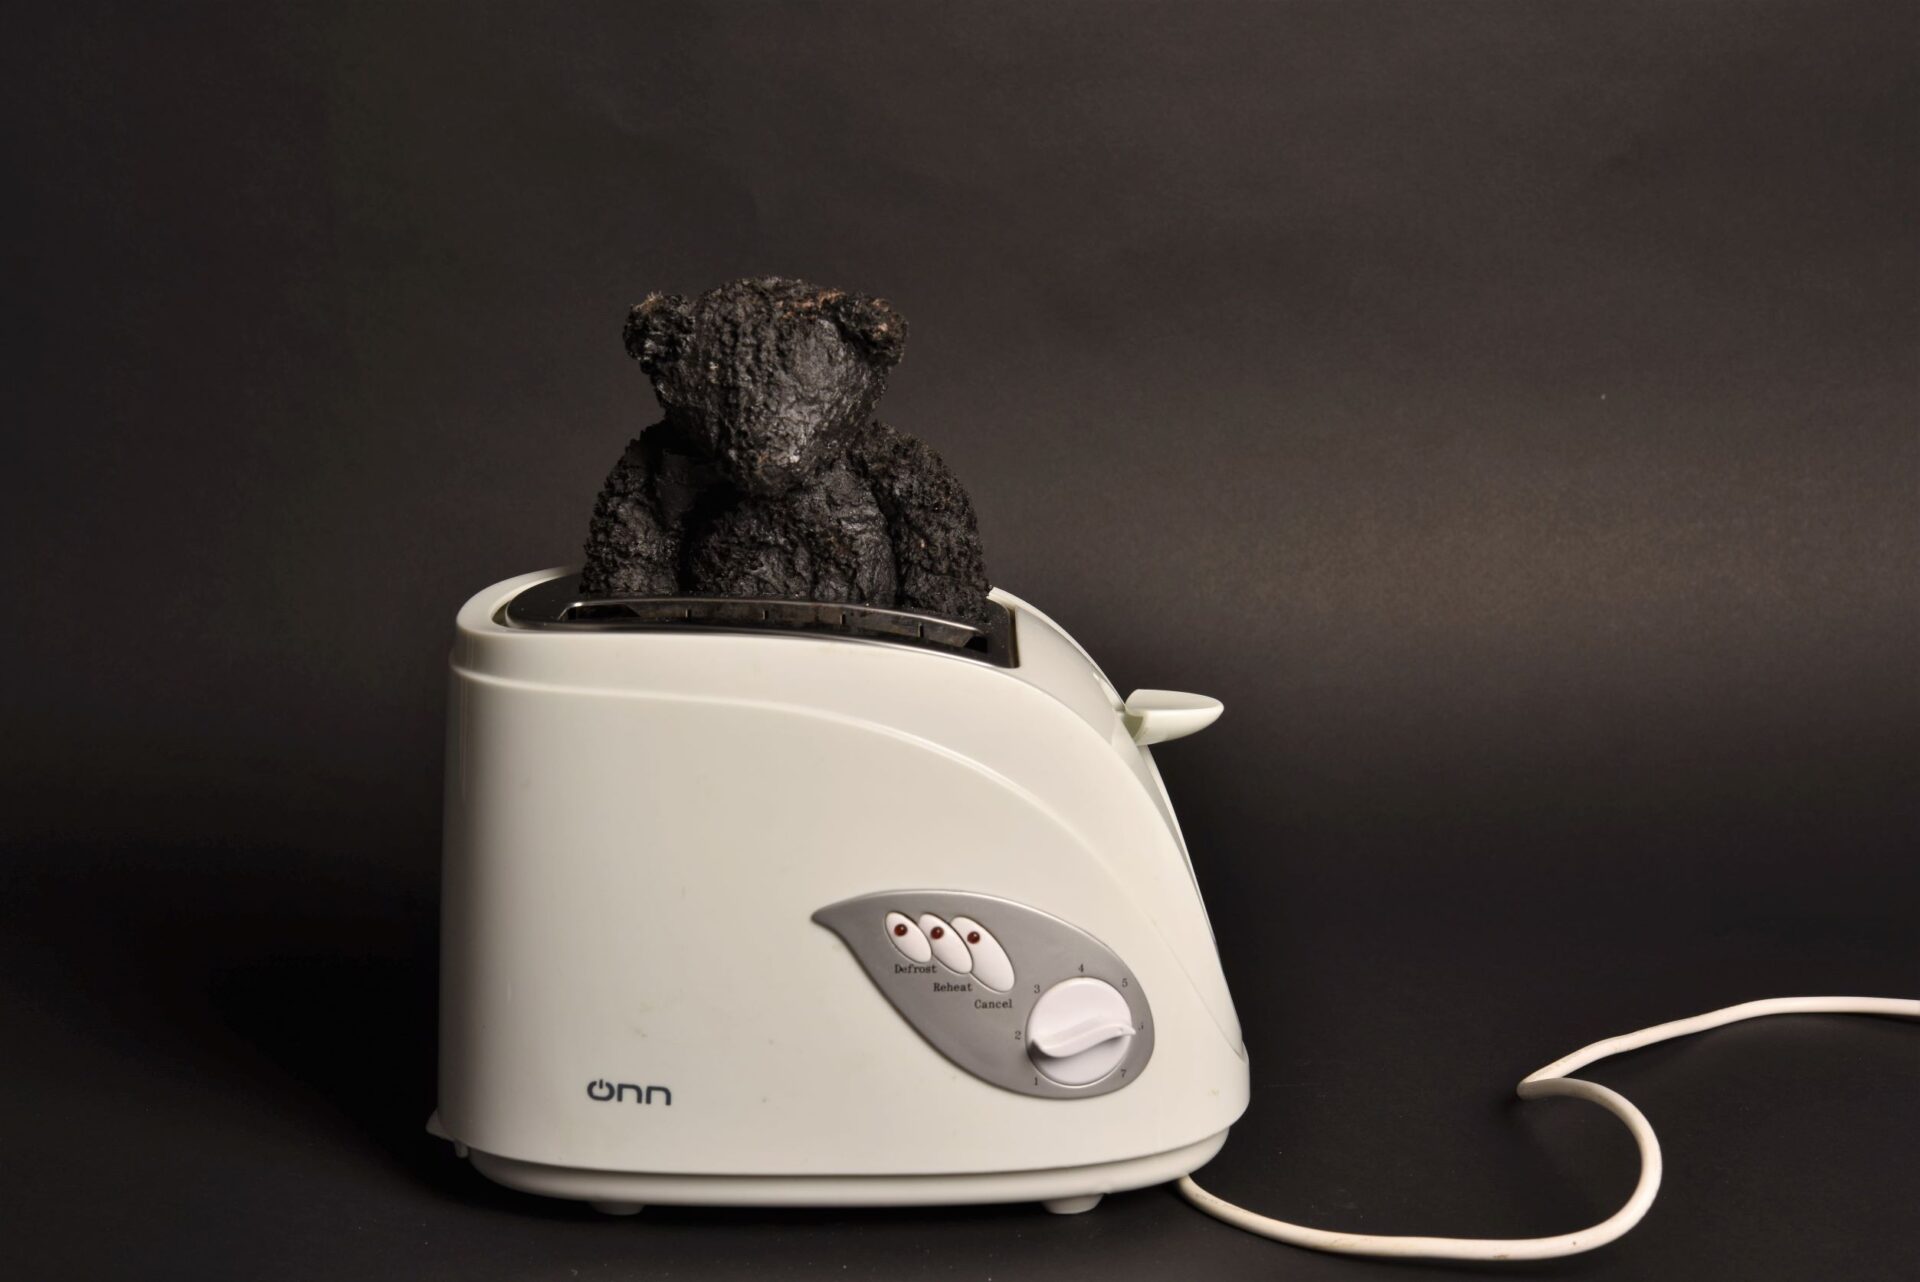 Teddy in a toaster II, toy teddy bear, bitumen paint, ONN toaster, dimensions variable 2021 NFS